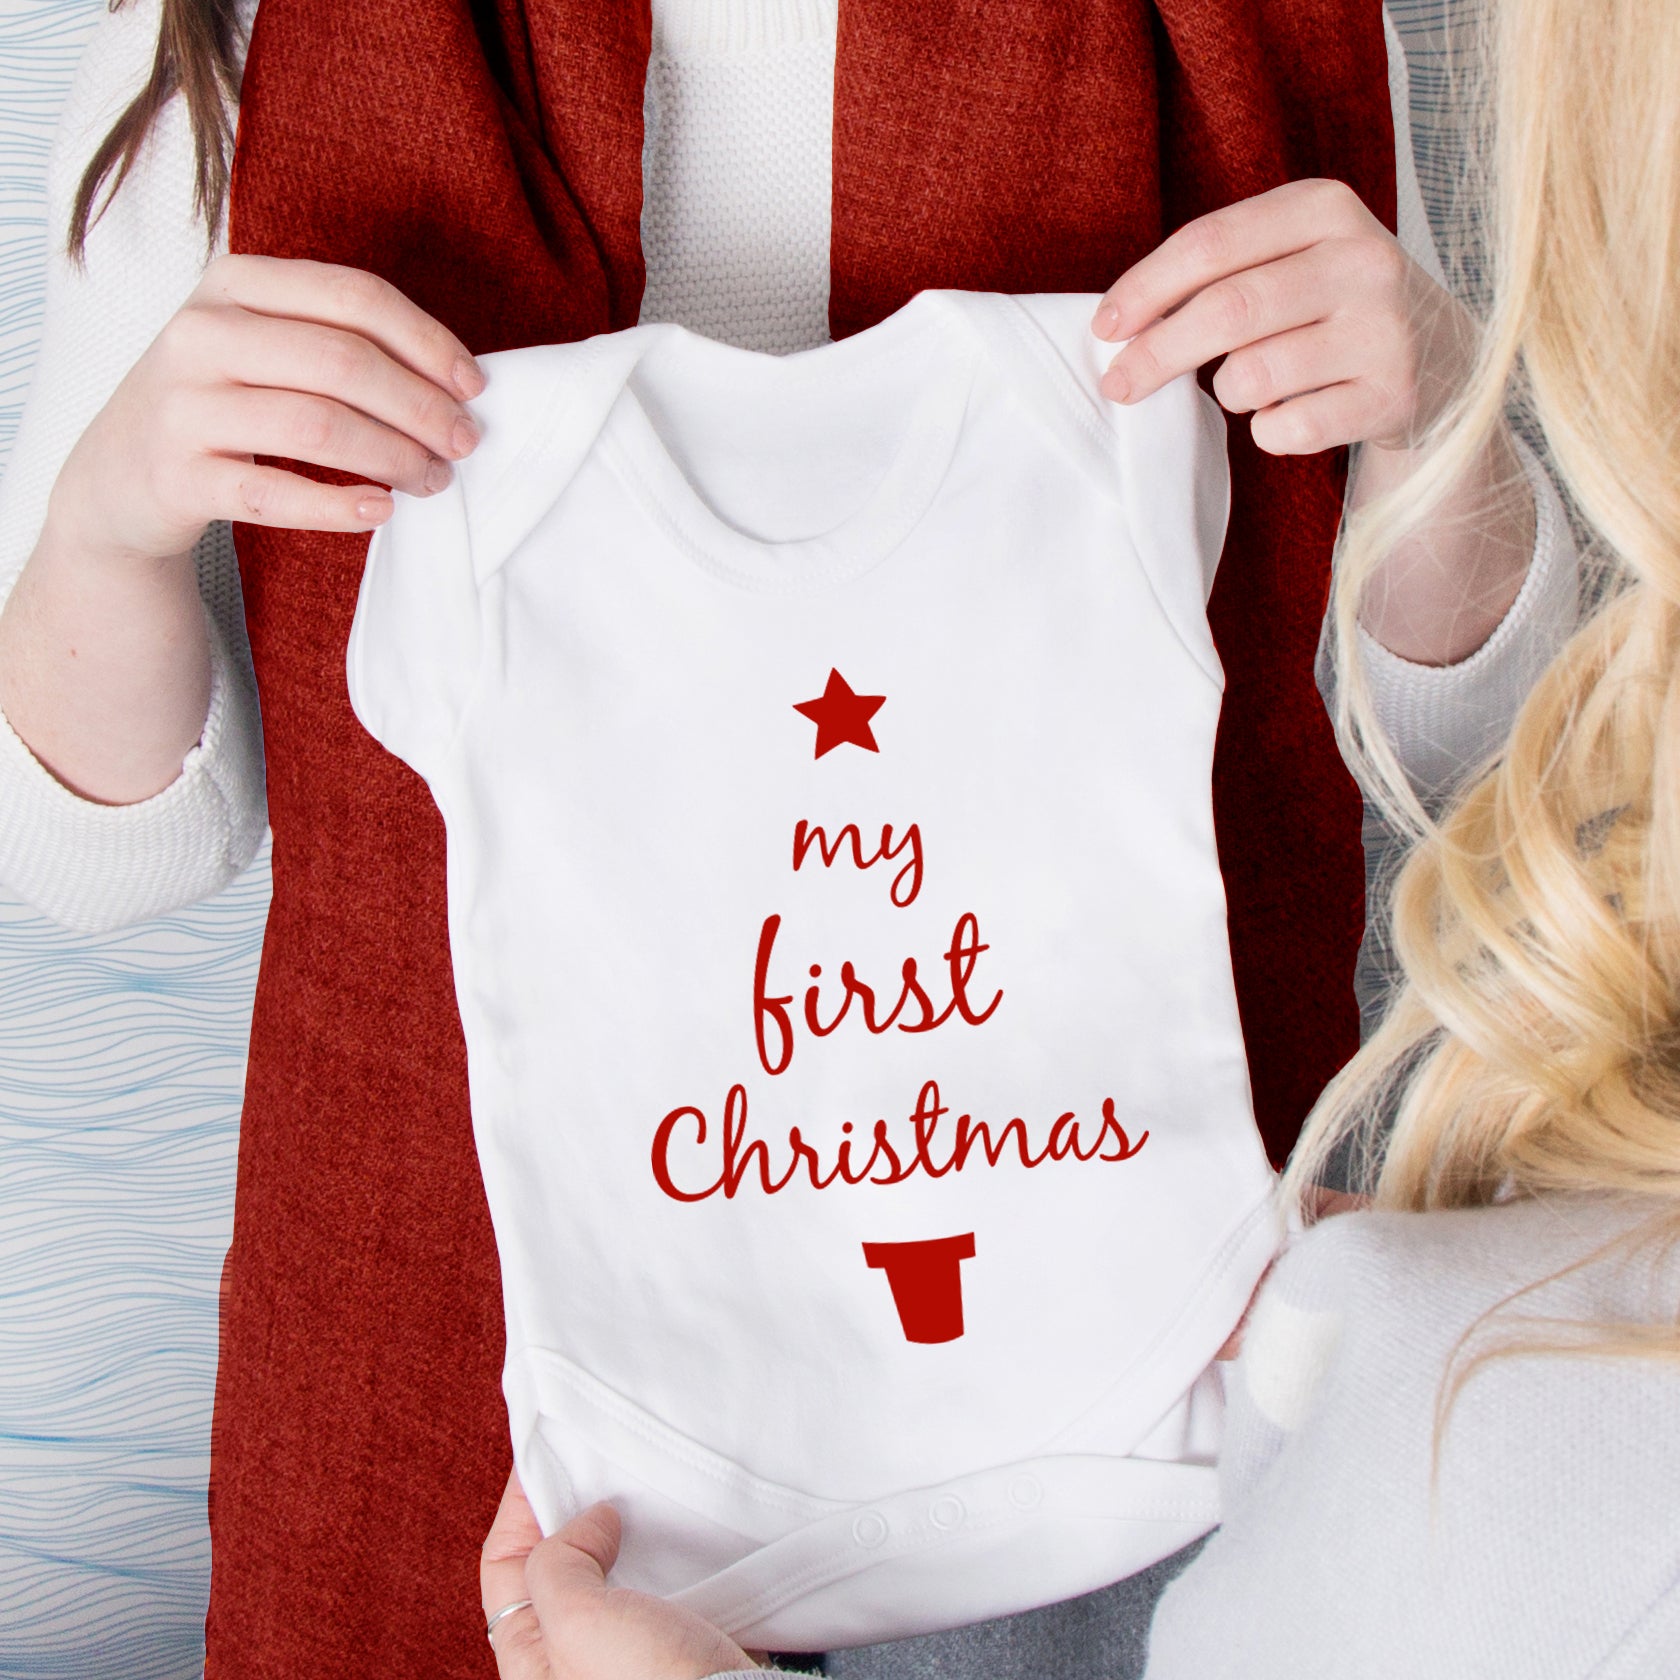 My First Christmas' Baby Grow Body Suit 